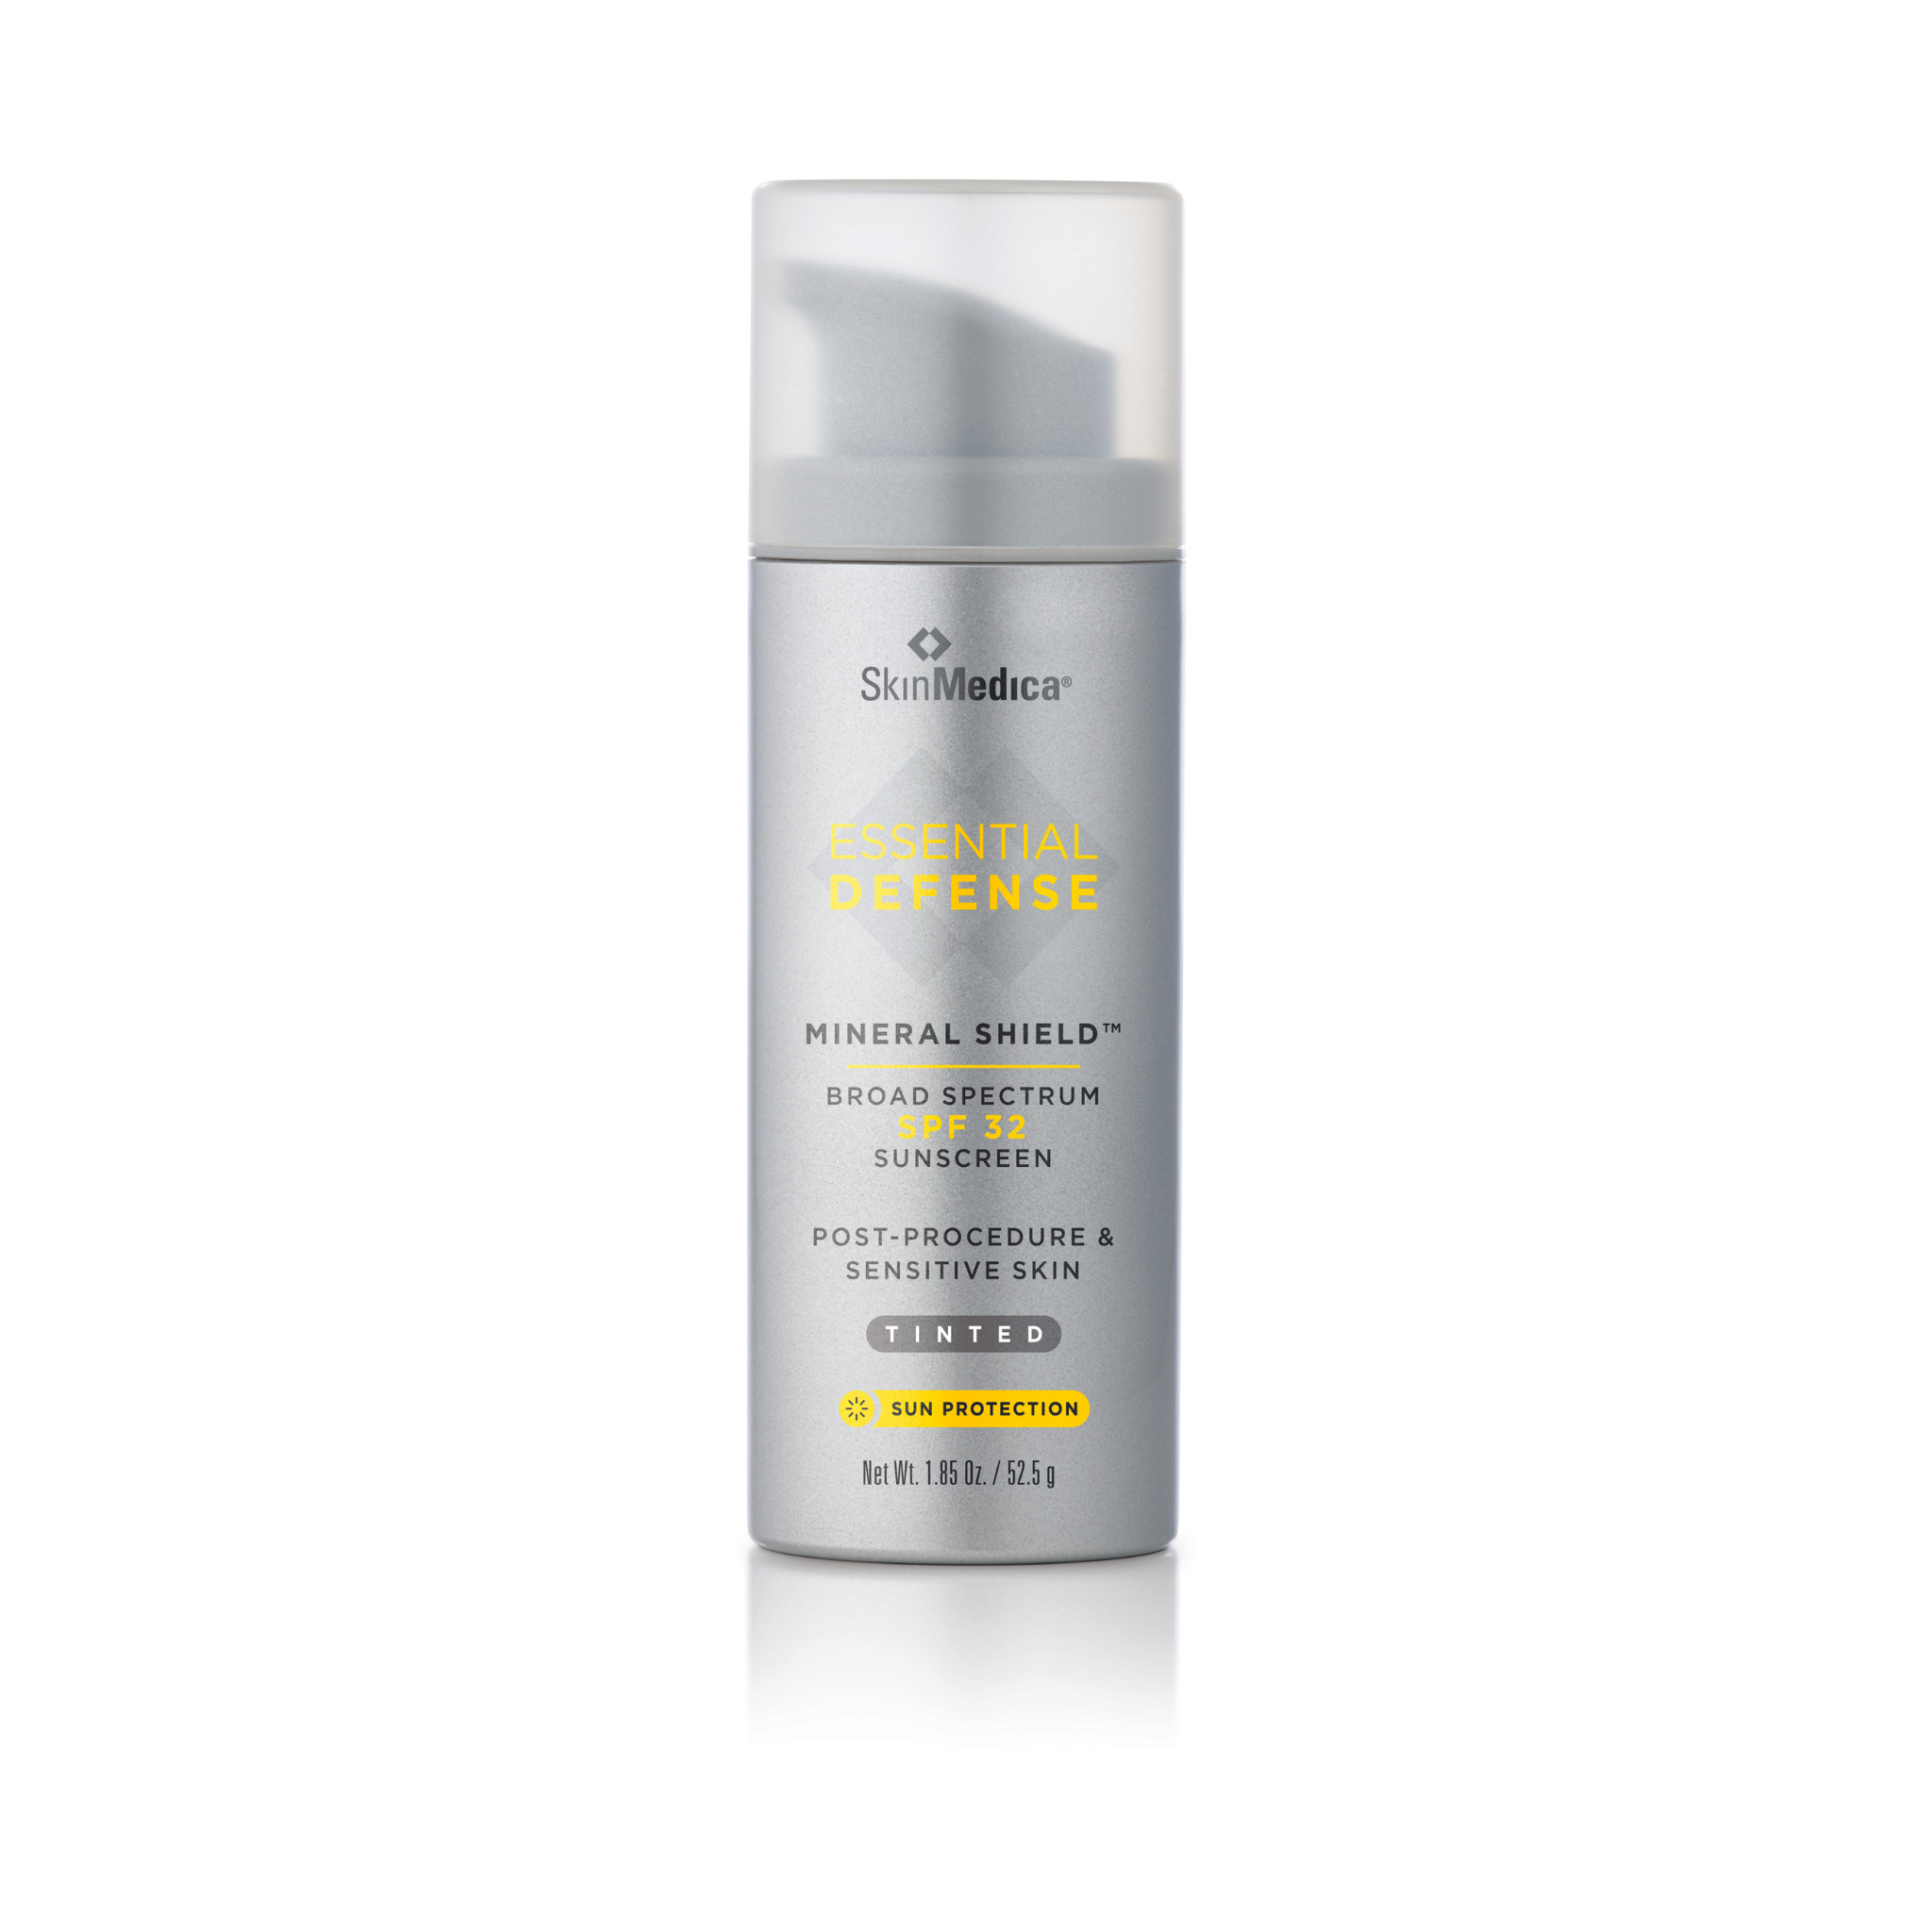 Essential Defense Mineral Shield Tinted SPF 32